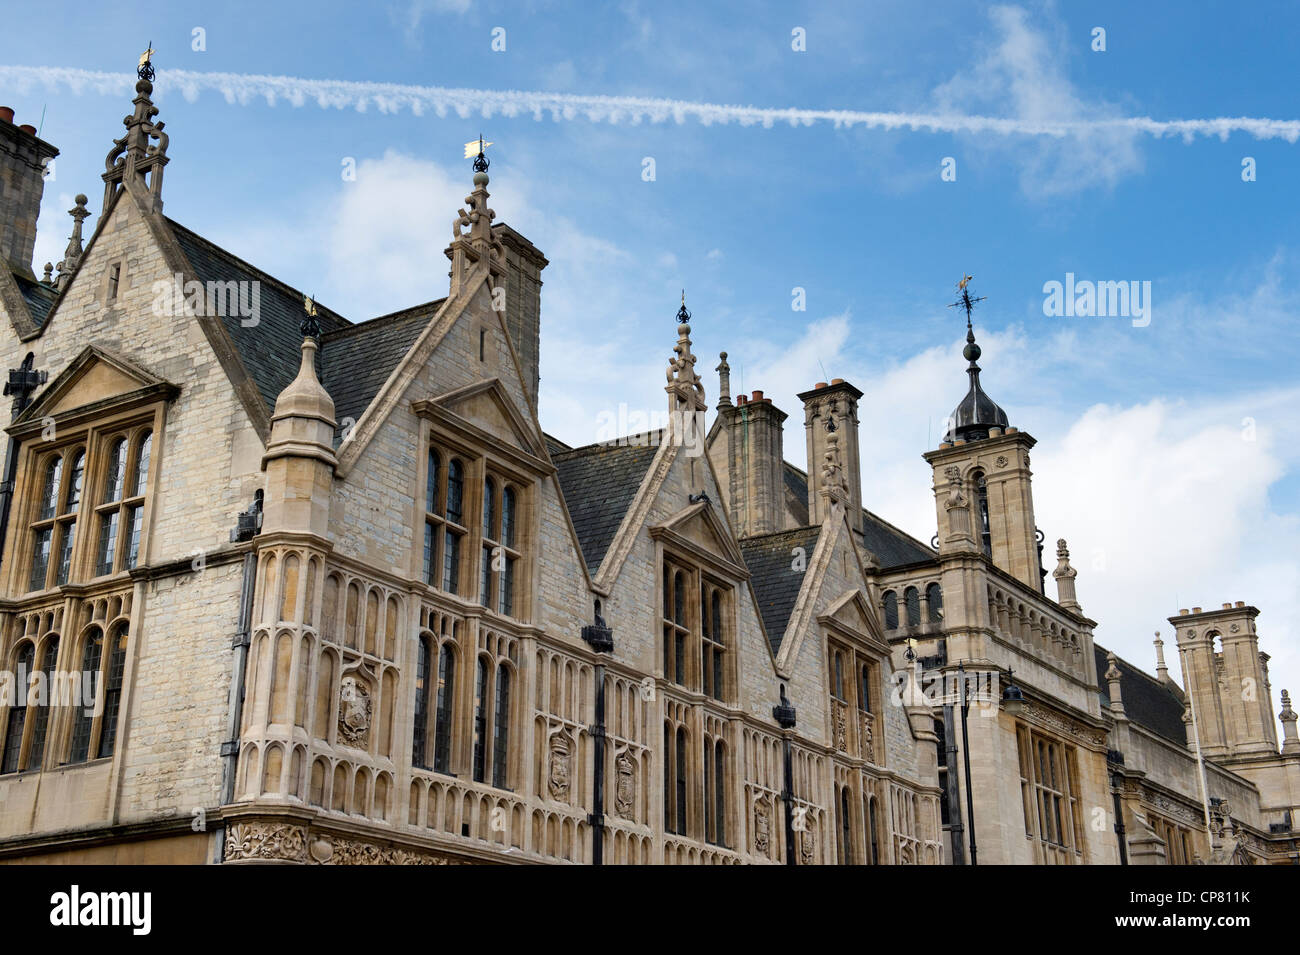 Ruskin school of drawing and fine art. Oxford University, Oxfordshire,  England Stock Photo - Alamy